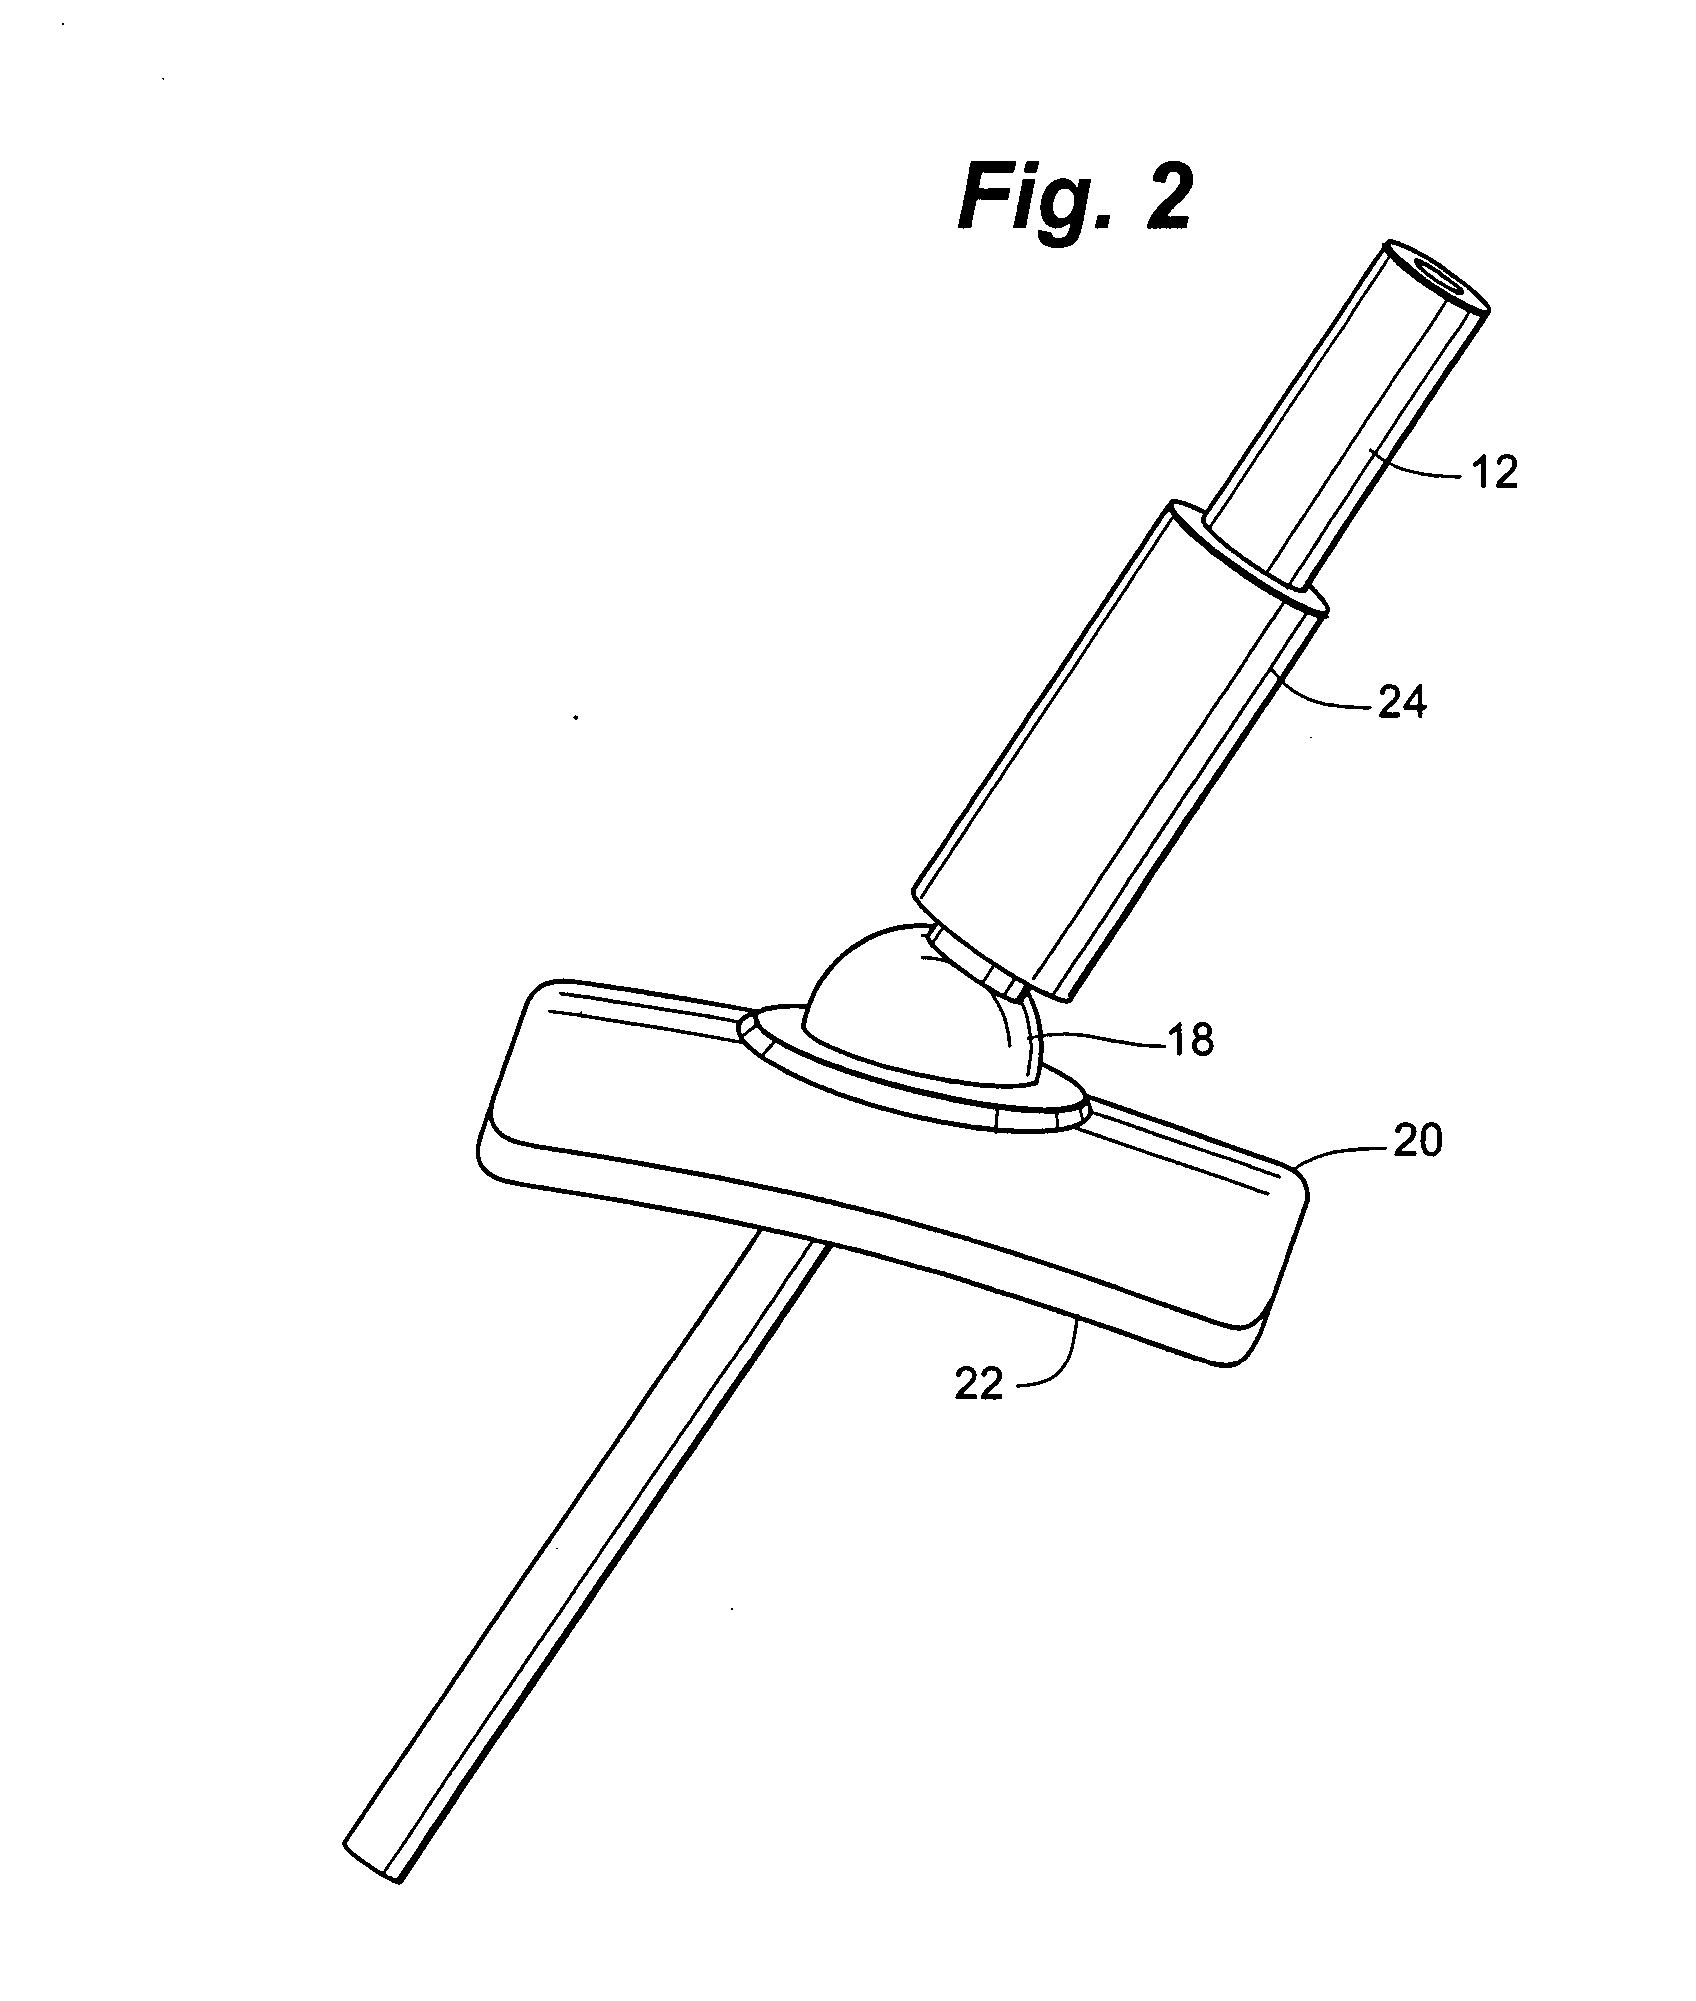 Anchorless non-invasive force dissipation system for orthopedic instrumentation